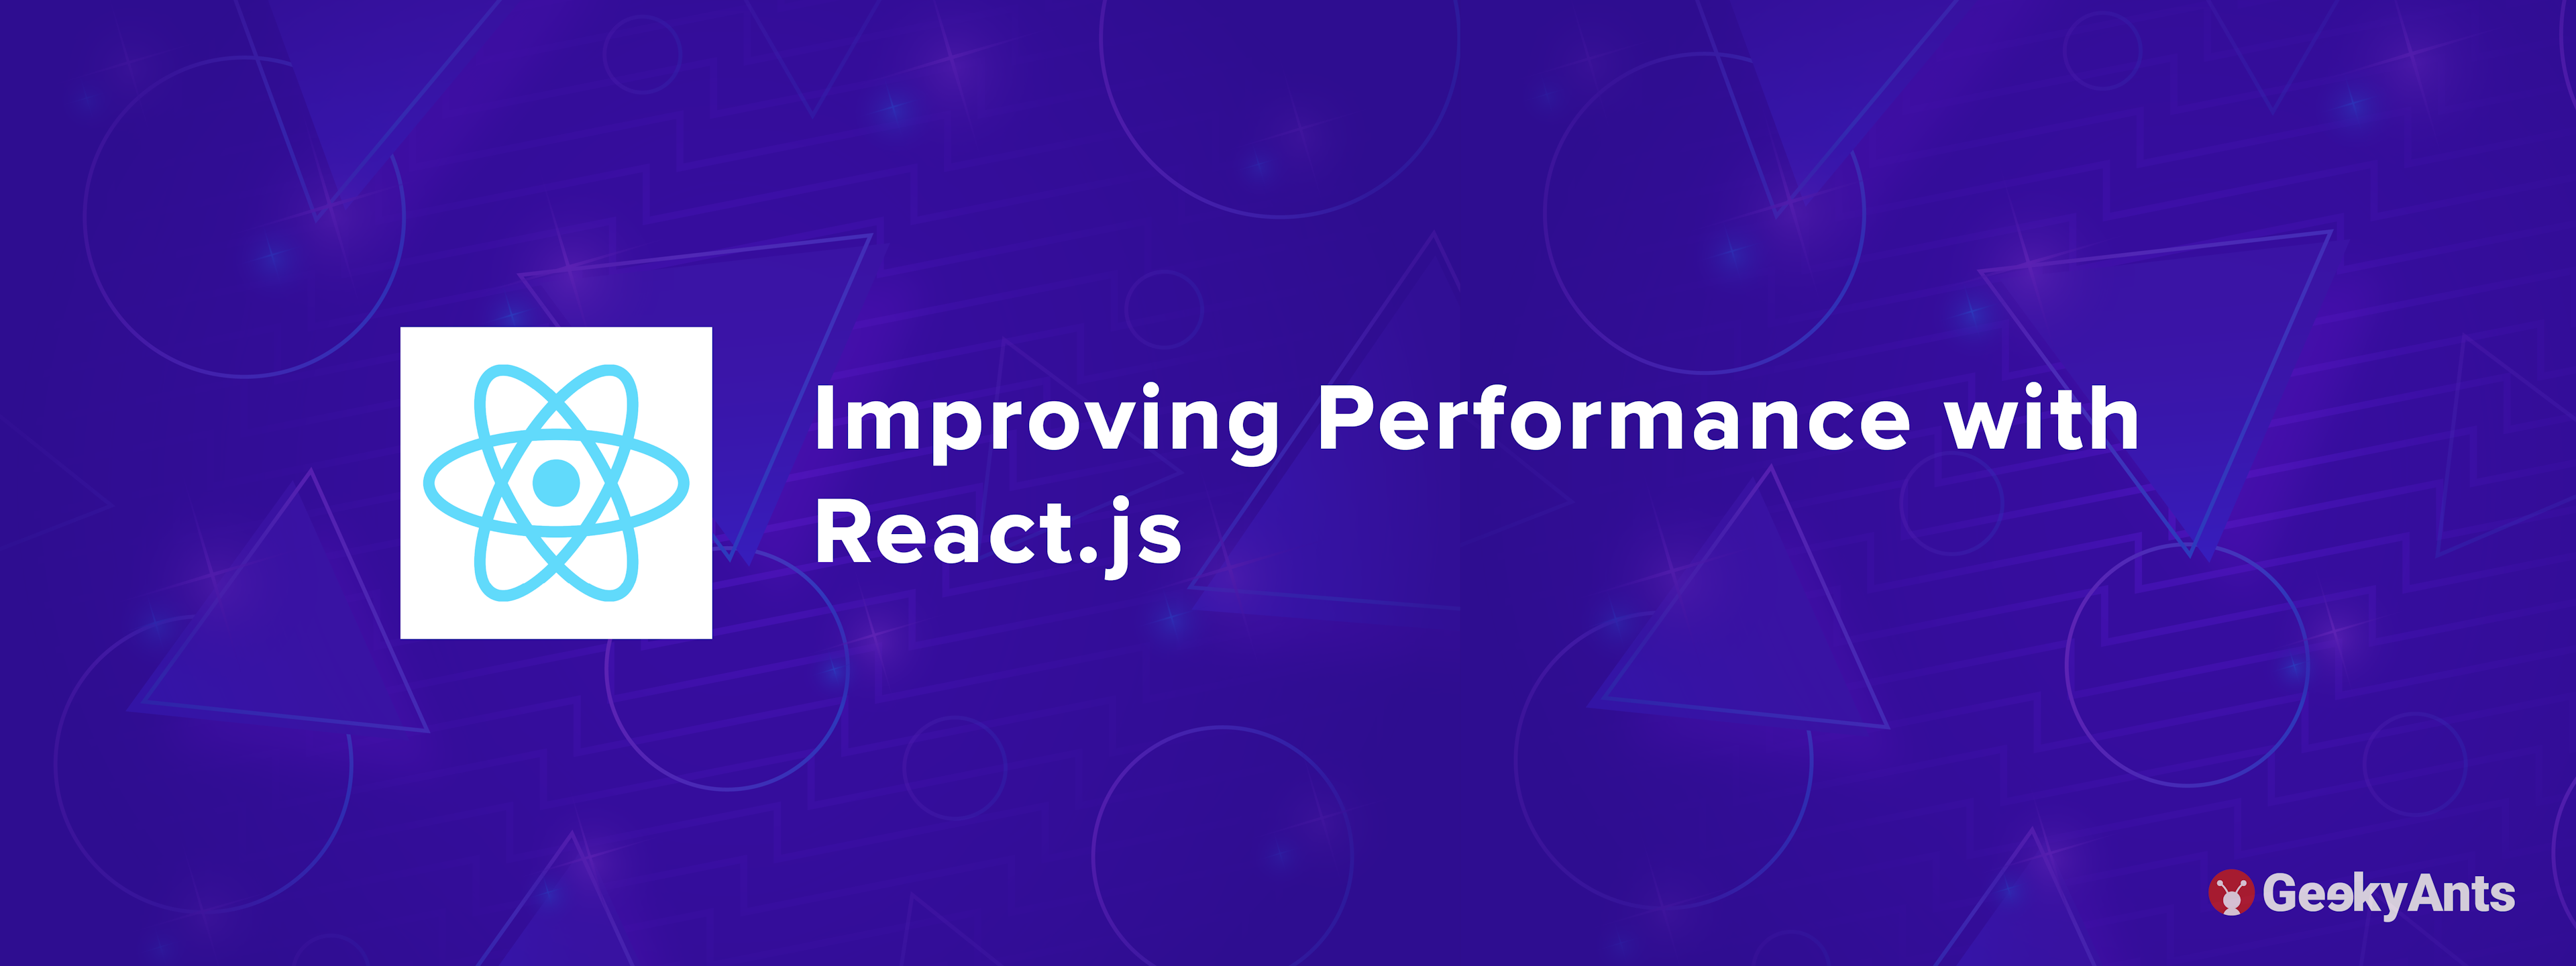 Improving Performance with React.js